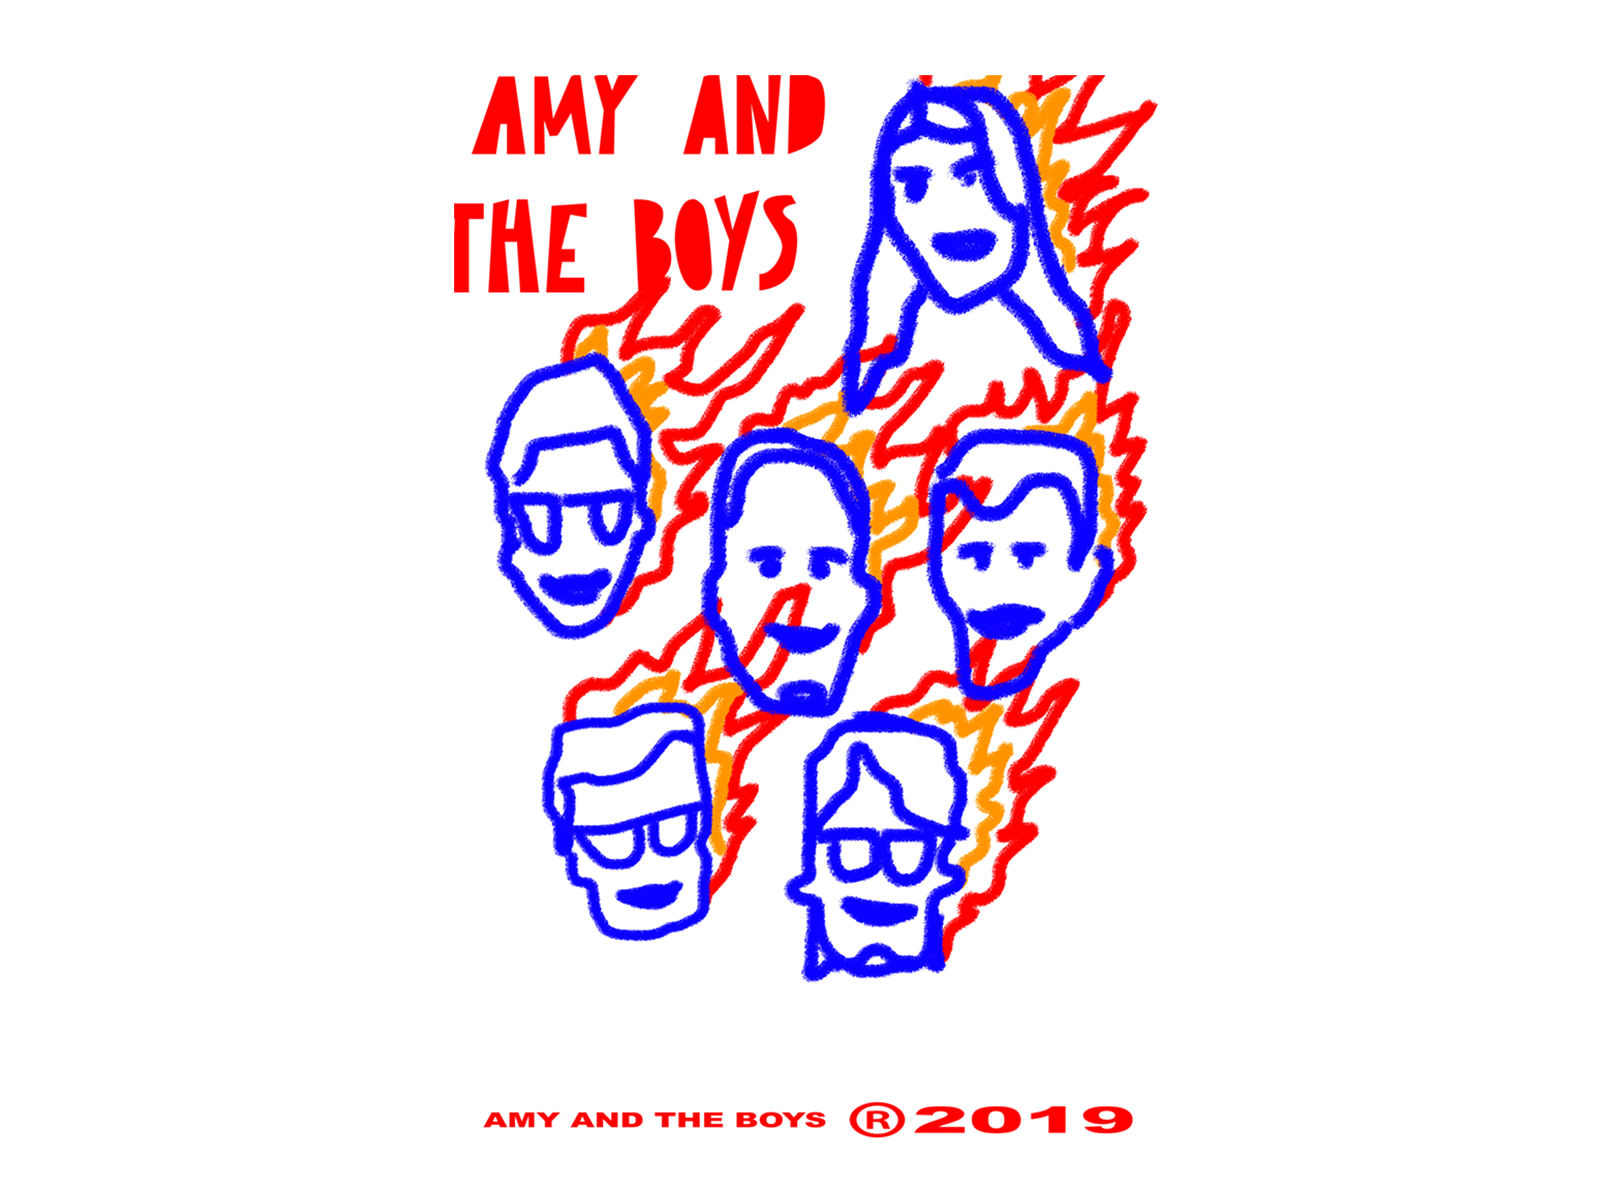 Amy and the Boys animation band colourful design fire gif graphic illustration music musicians paint poster singer